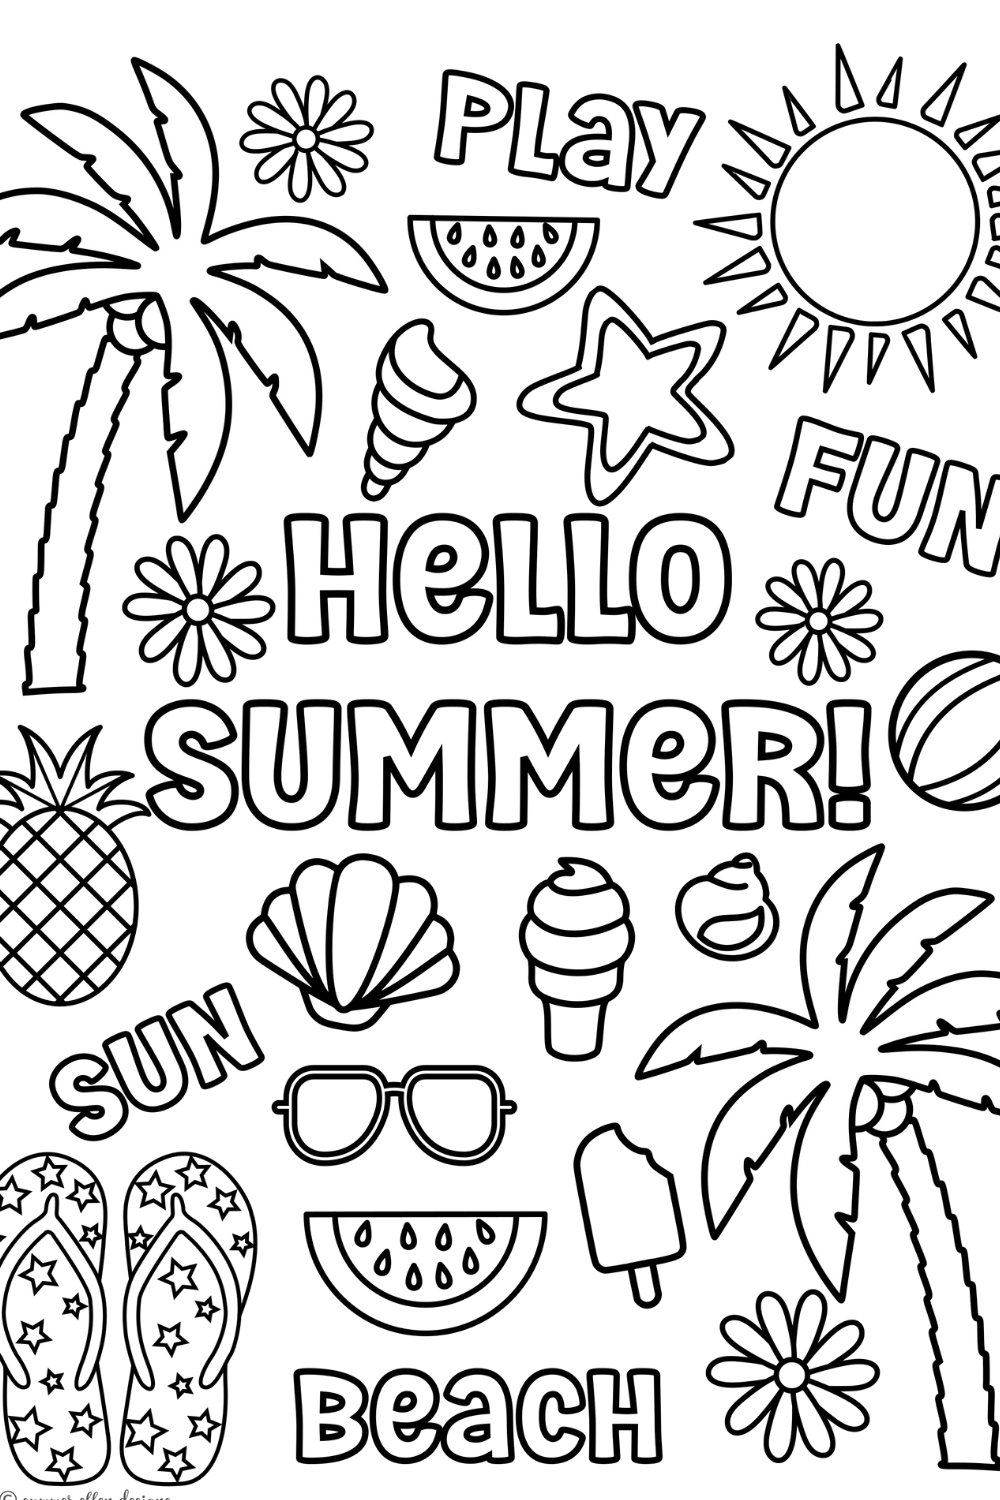 Hello summer printable page summer vacation coloring kids coloring pages coloring sheets for kids adults pdf digital download